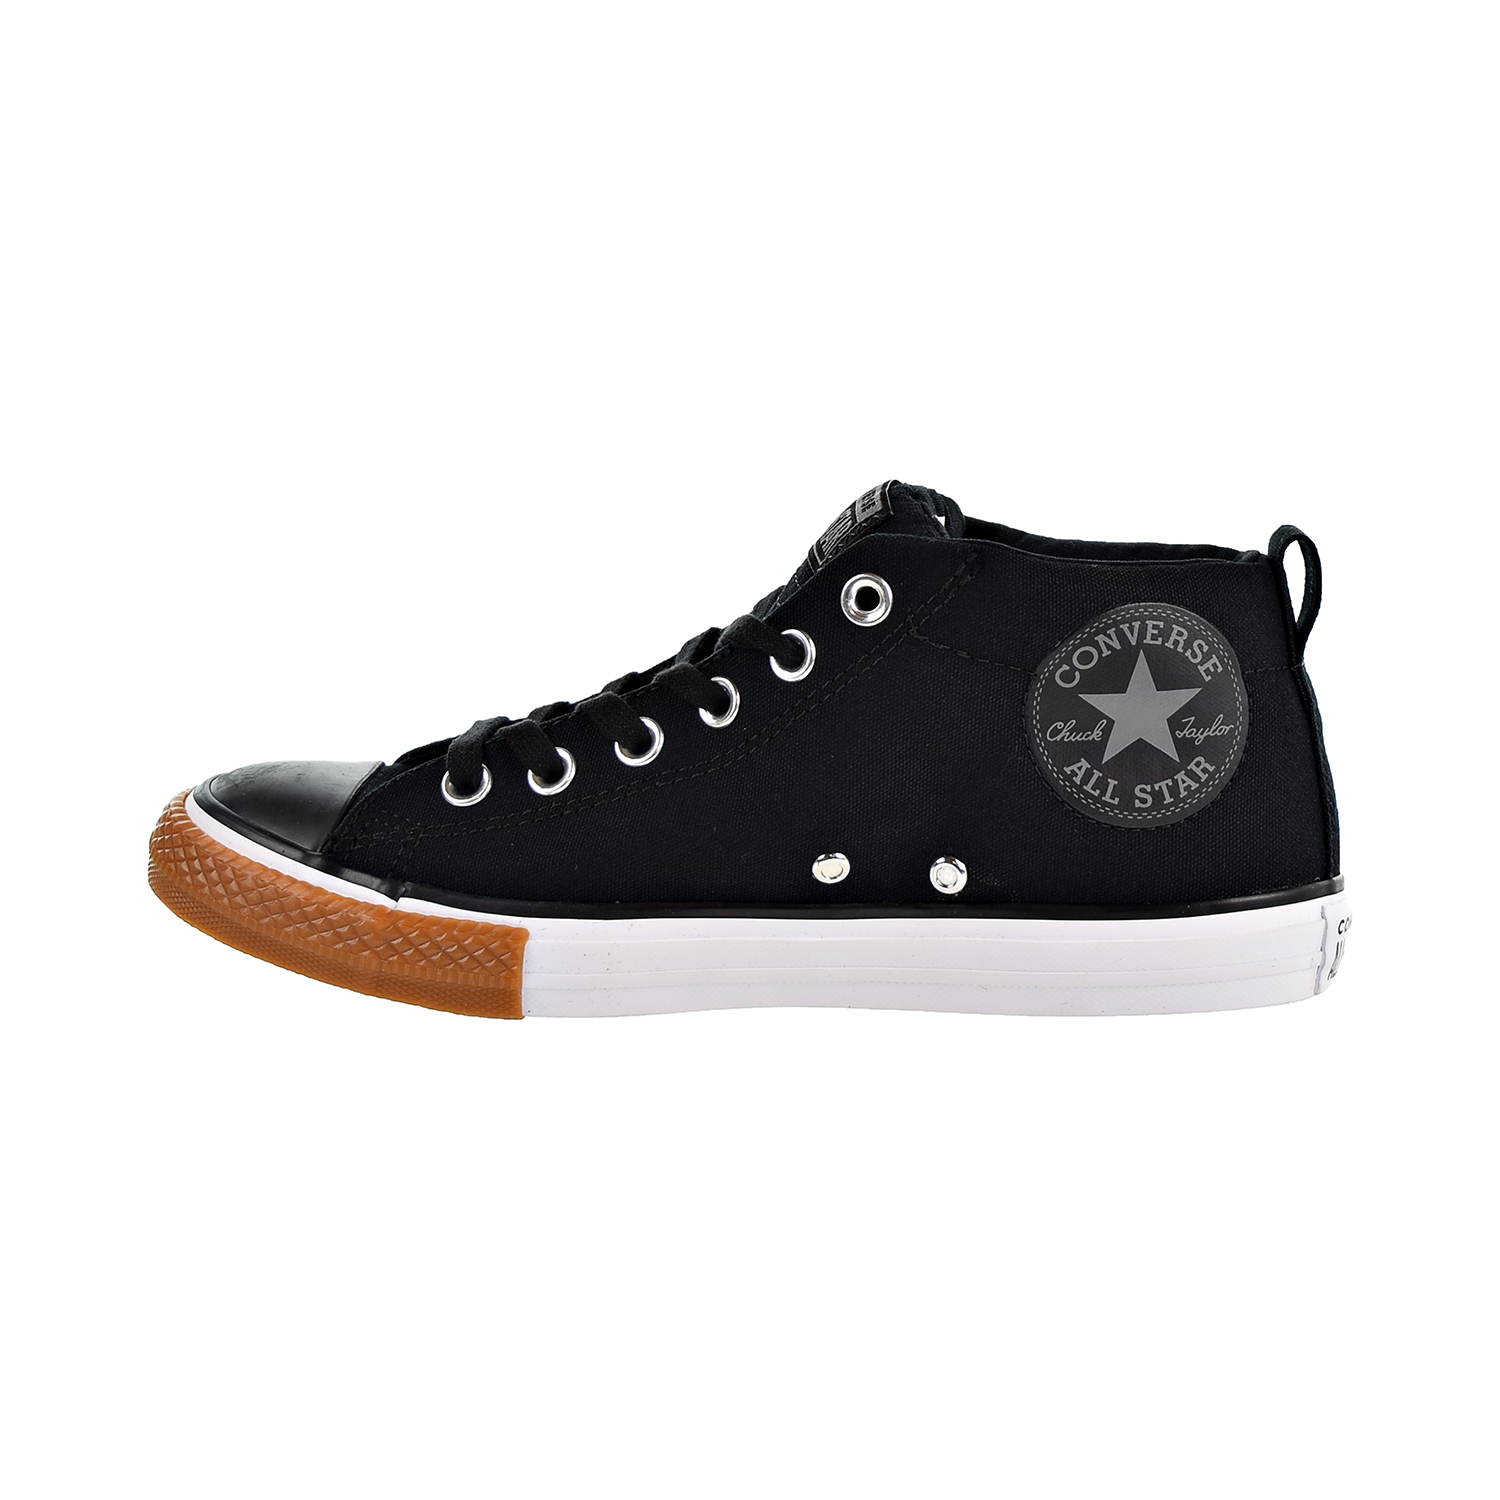 Converse Chuck Taylor All Star Street Mid Kids Shoes Black/Black/White 661908f - image 4 of 6